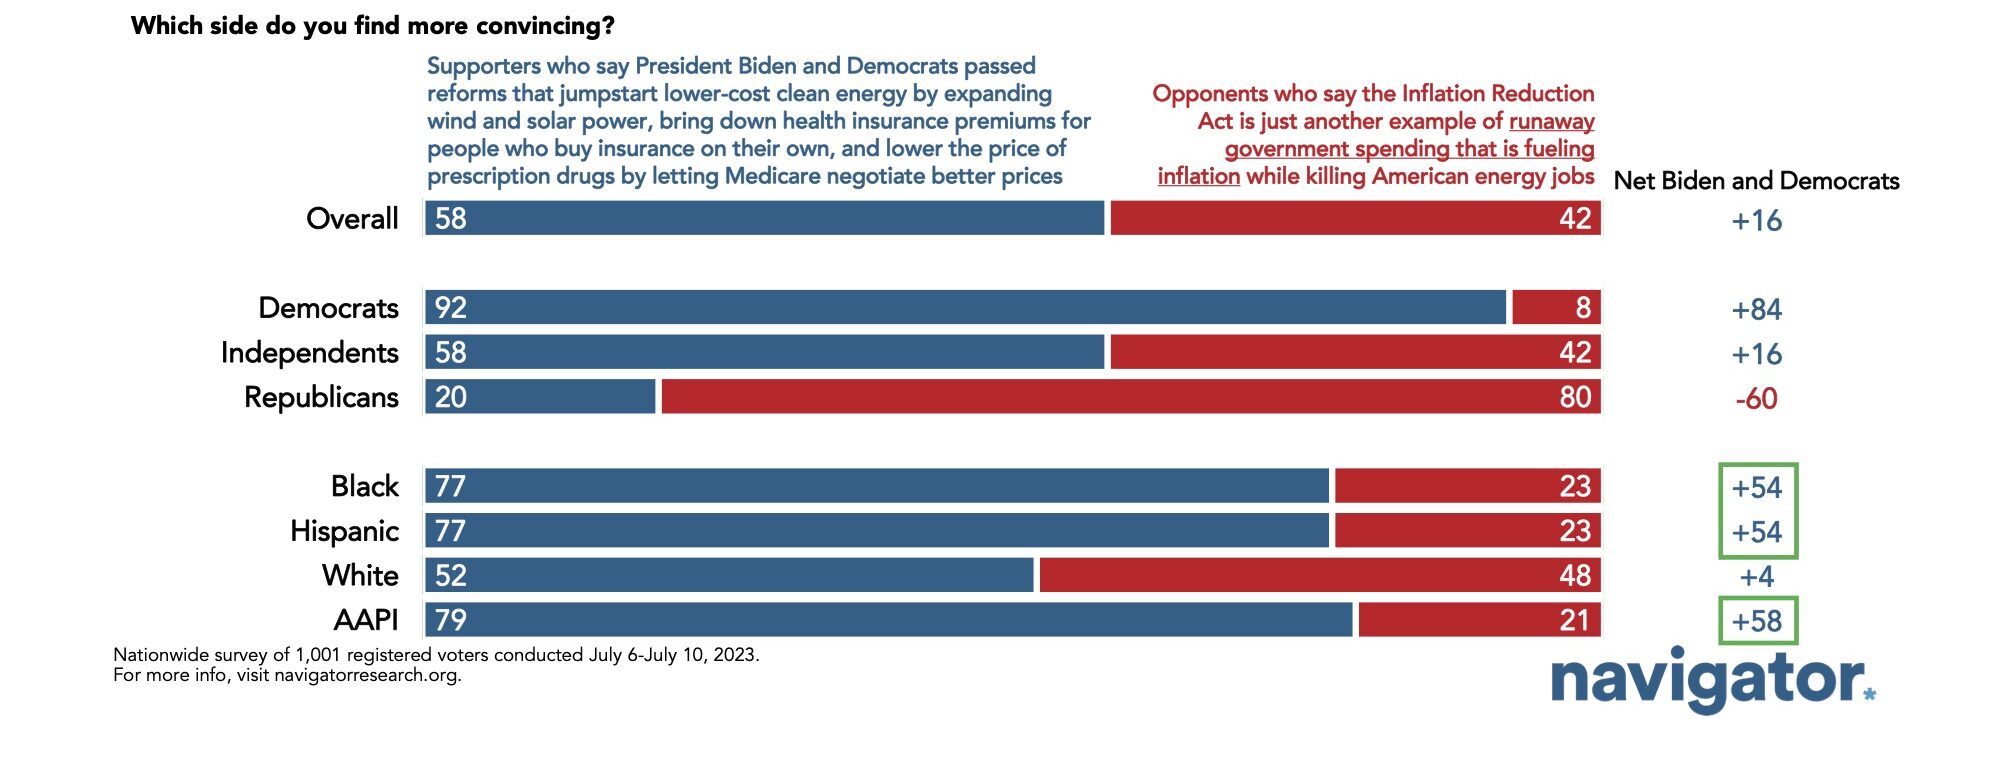 Survey results to the following question: Which side do you find more convincing? a. Supporters who say President Biden and Democrats passed reforms that jumpstart lower-cost clean energy by expanding wind and solar power, bring down health insurance premiums for people who buy insurance on their own, and lower the price of prescription drugs by letting Medicare negotiate better prices. b. Opponents who say the Inflation Reduction Act is just another example of runaway government spending that is fueling inflation while killing American energy jobs.